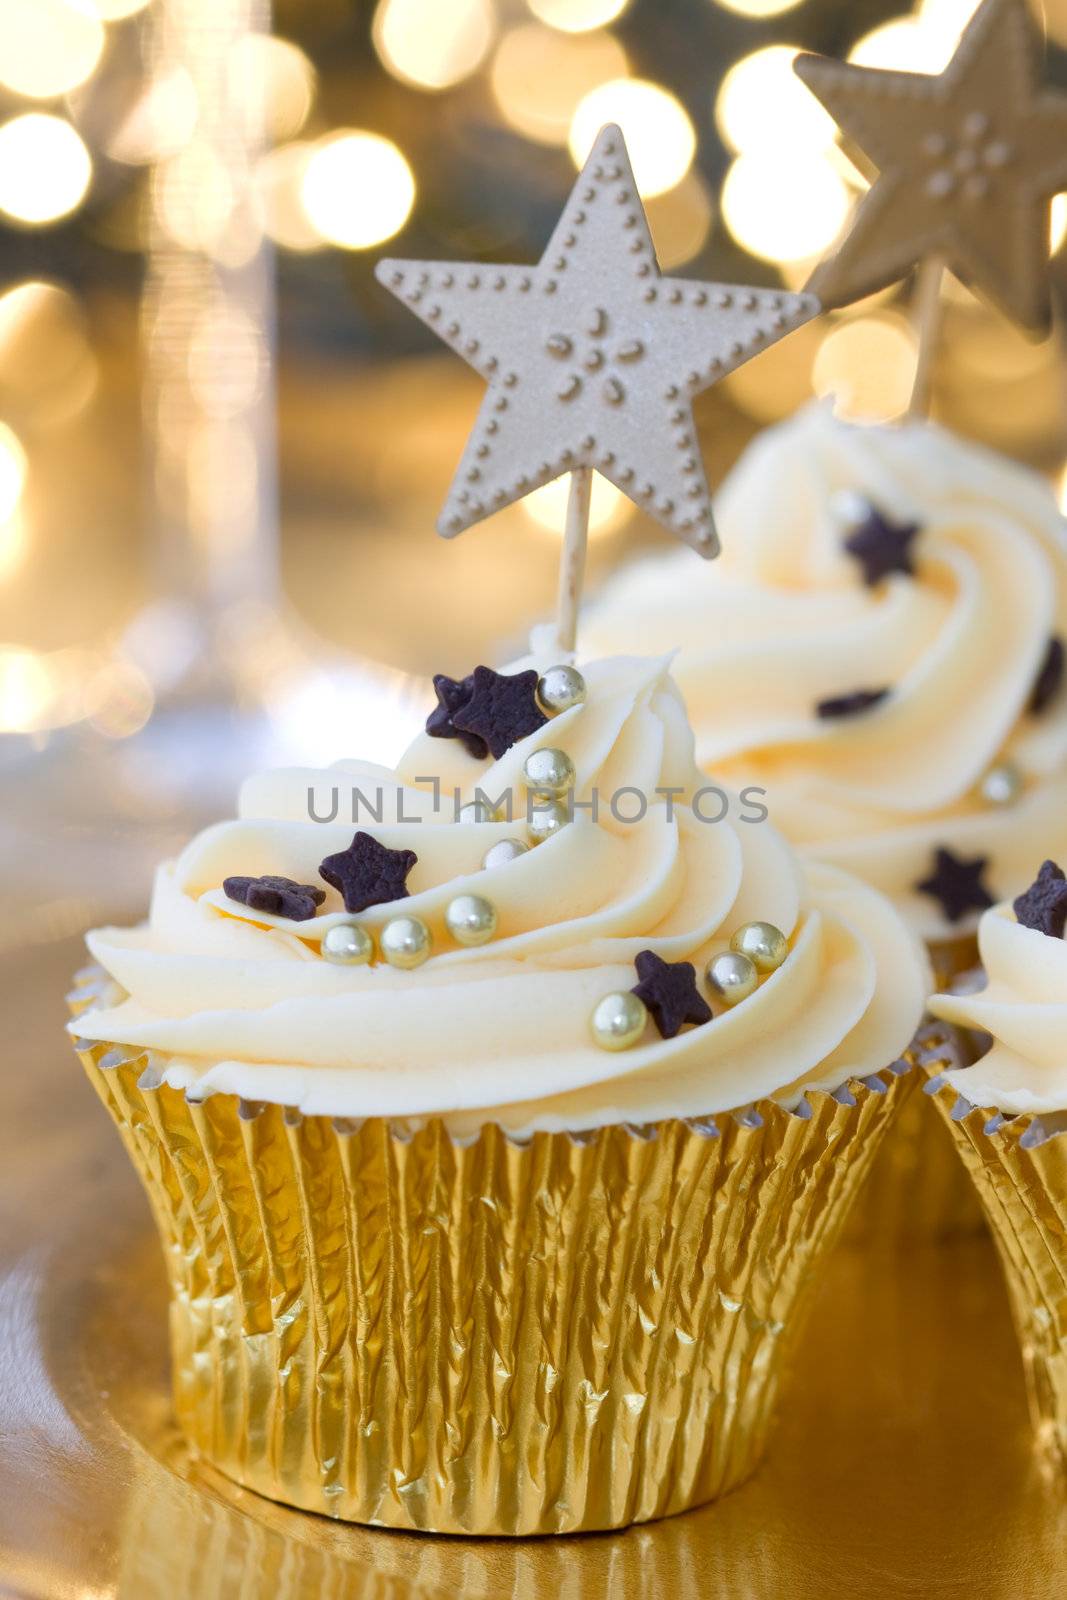 New Year celebration cupcakes by RuthBlack